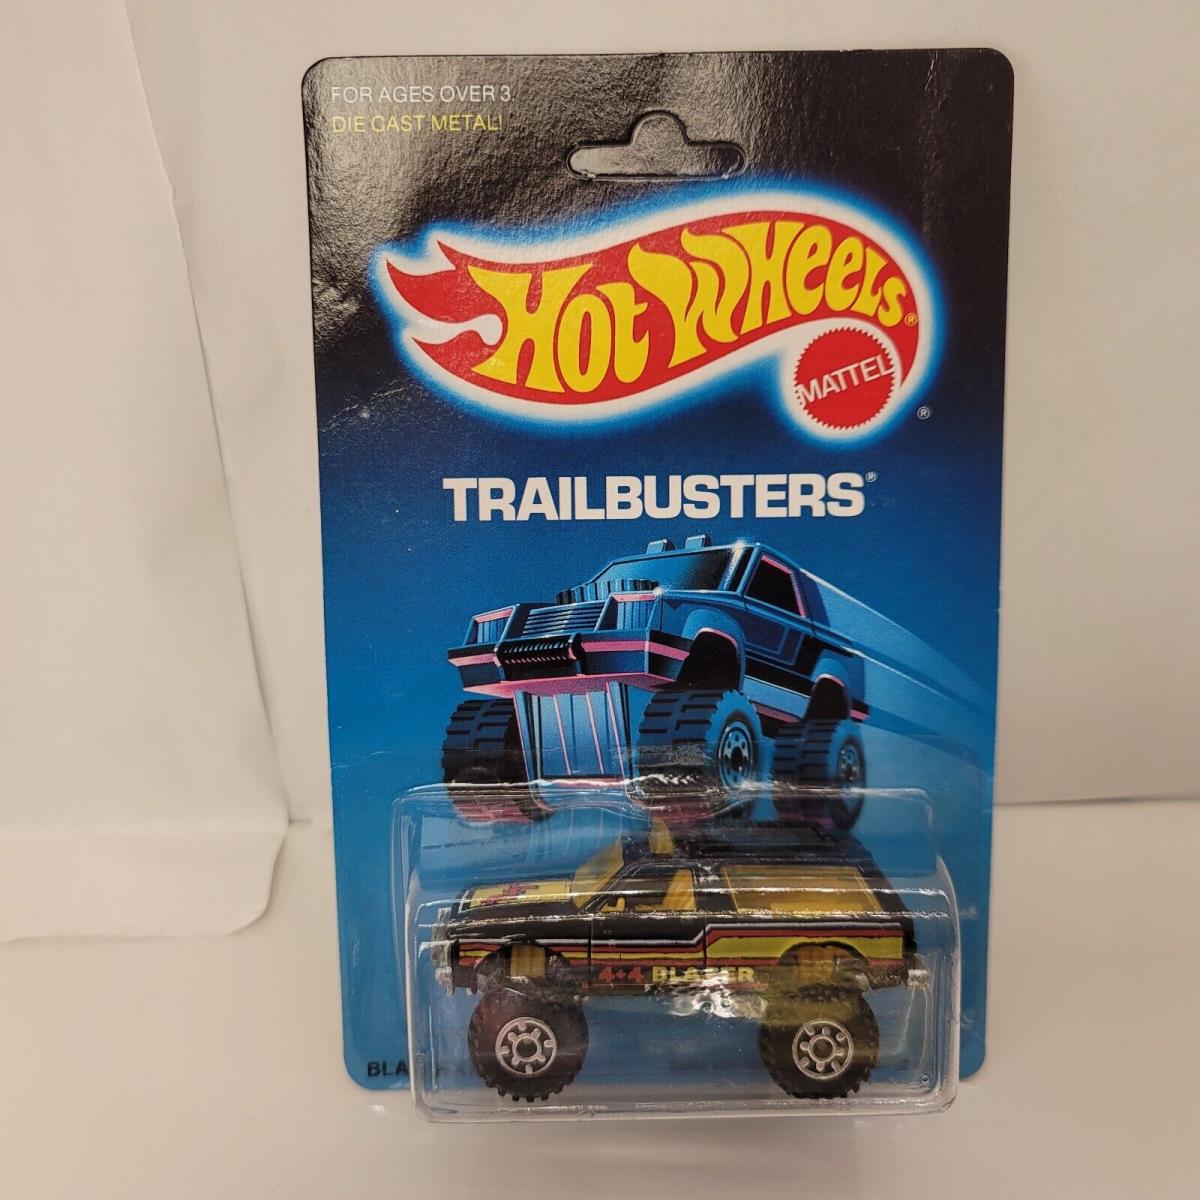 Blazer 4X4 Black Cts Trailbusters 1989 Hot Wheels Unpunched Malaysia KT99